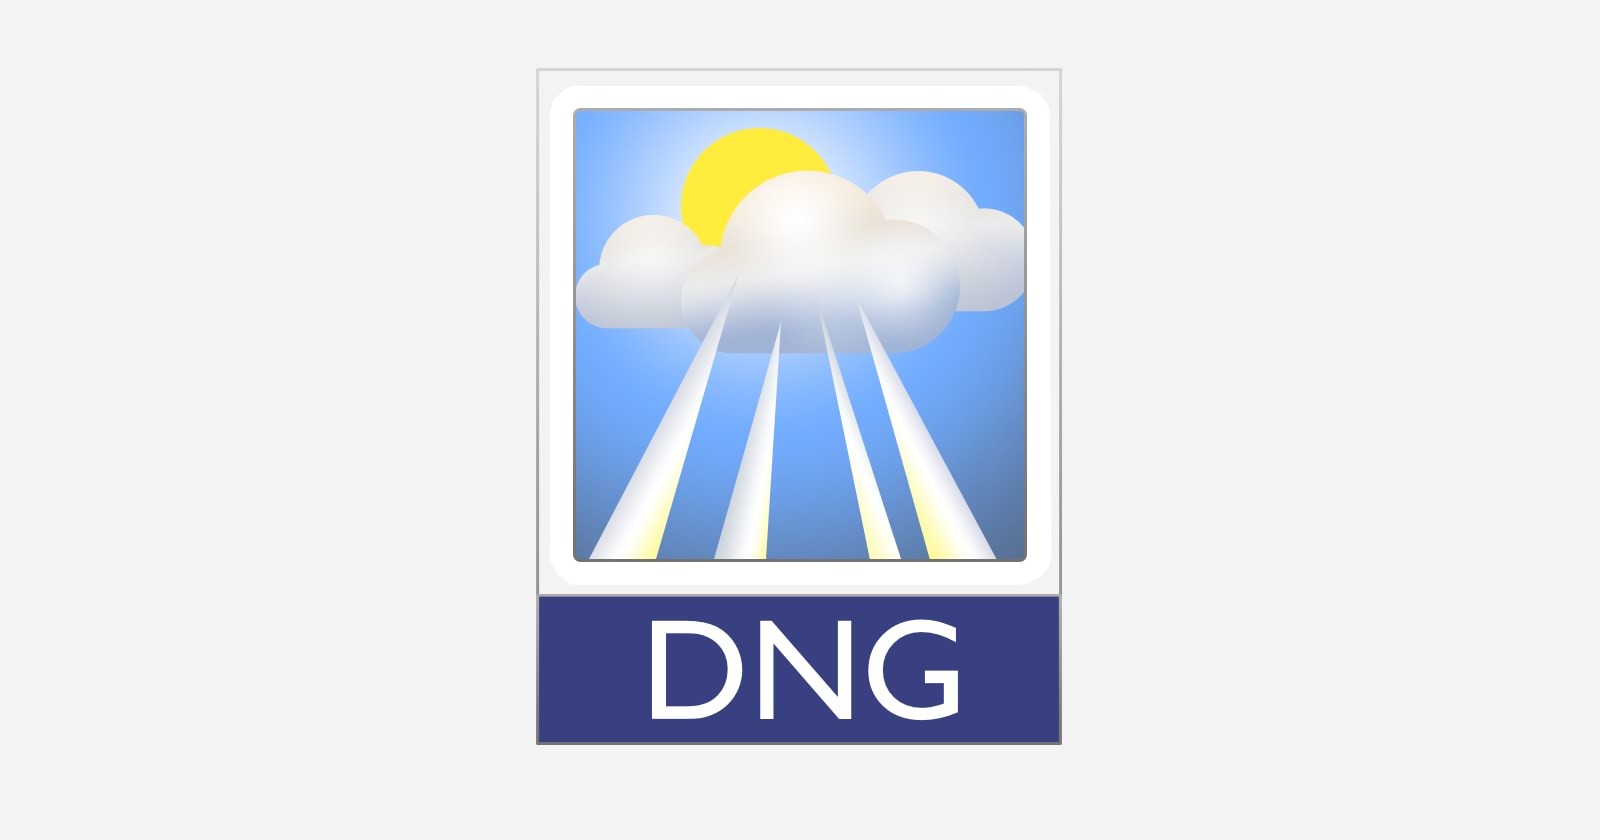 DNG File: What a .dng Image Is and How to Open It